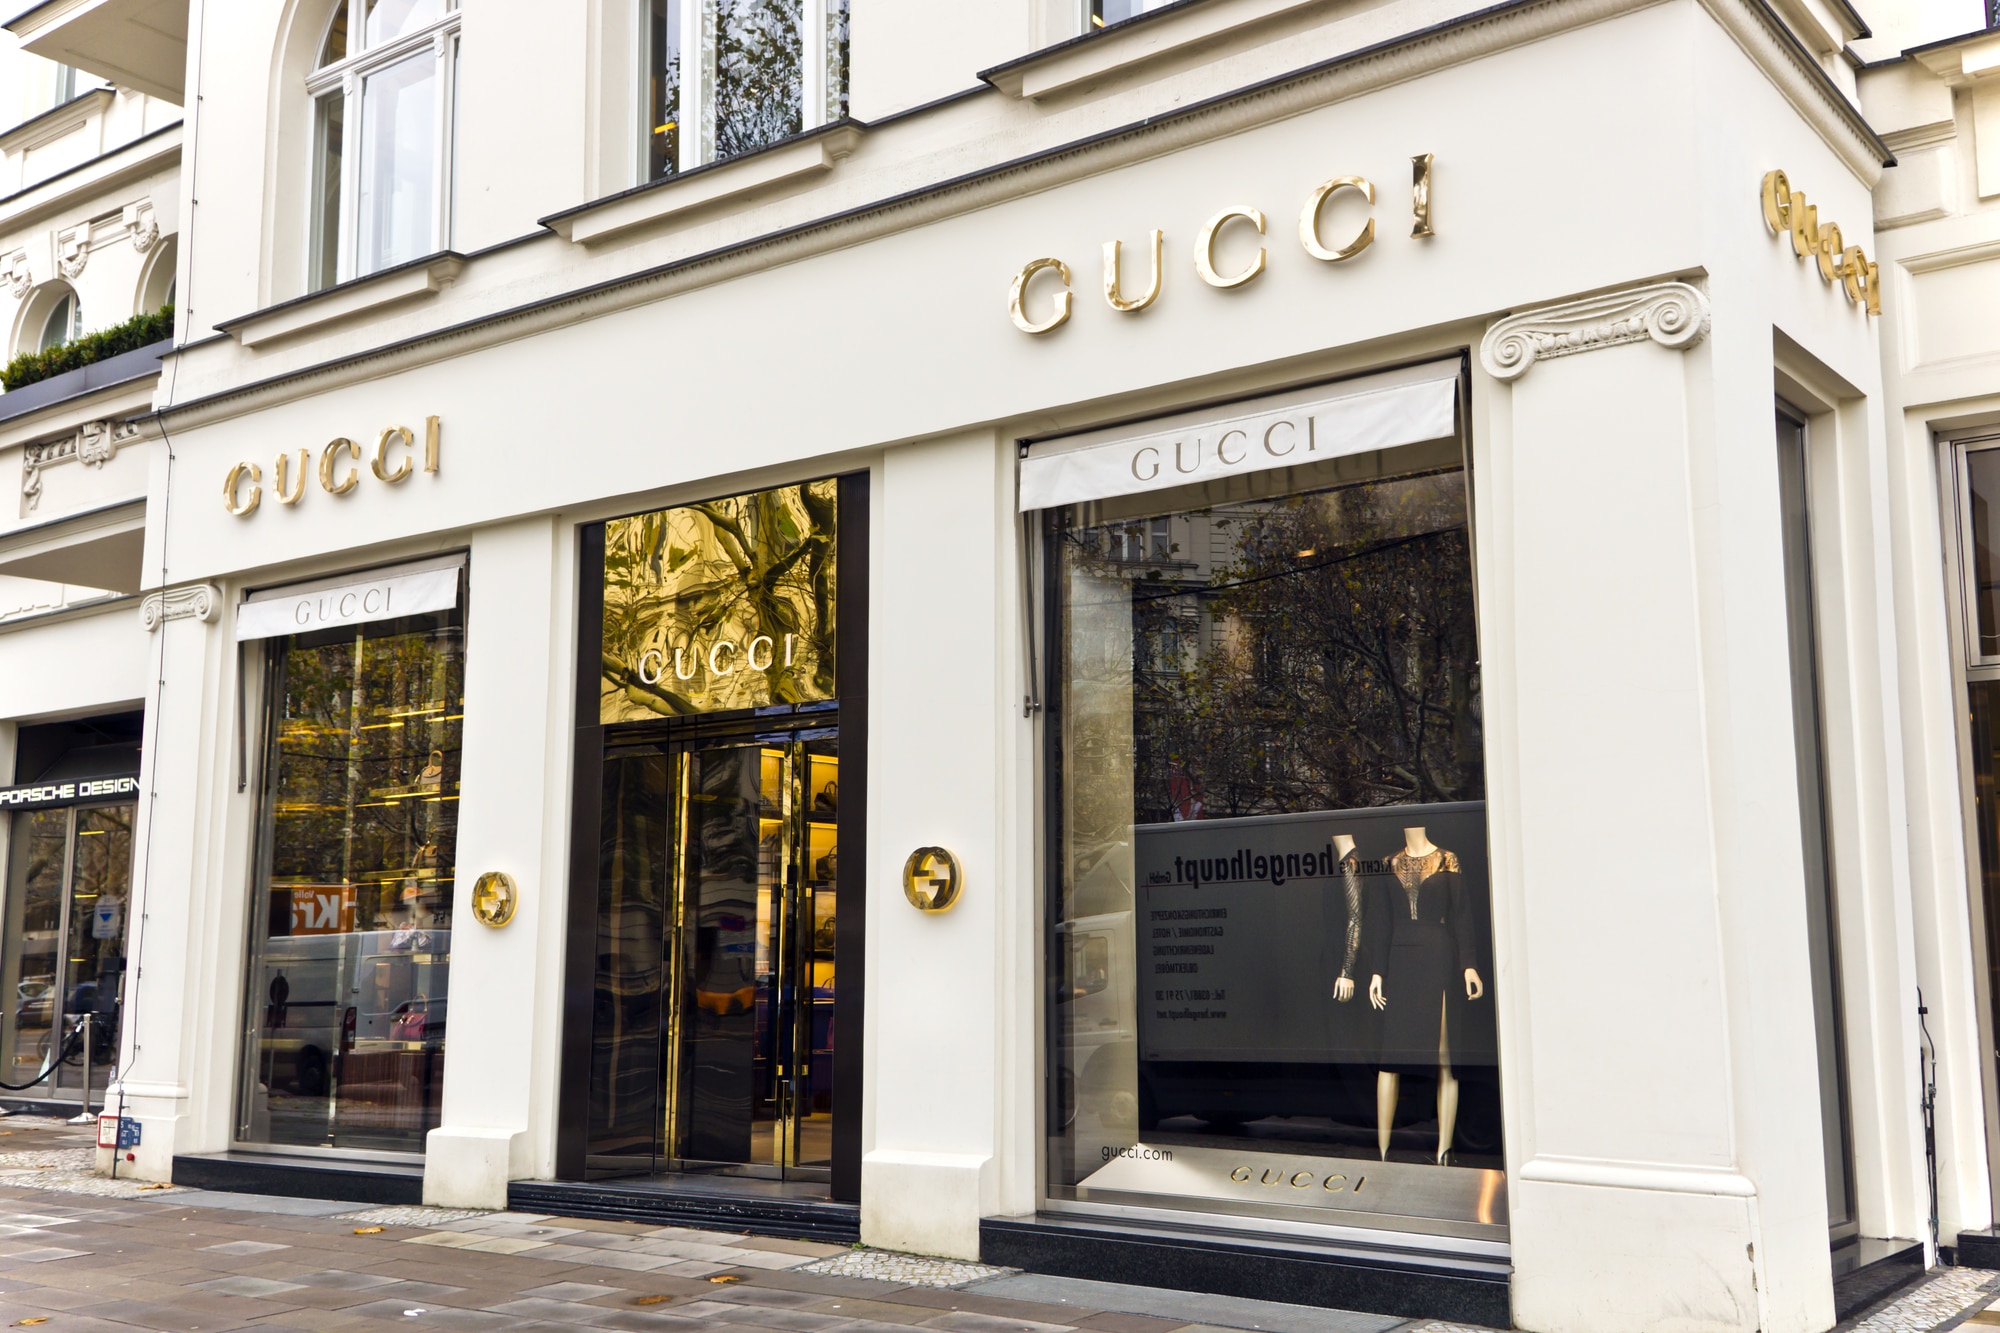 Gucci SWOT Analysis: 3 Weaknesses Undermining Gucci's Strengths